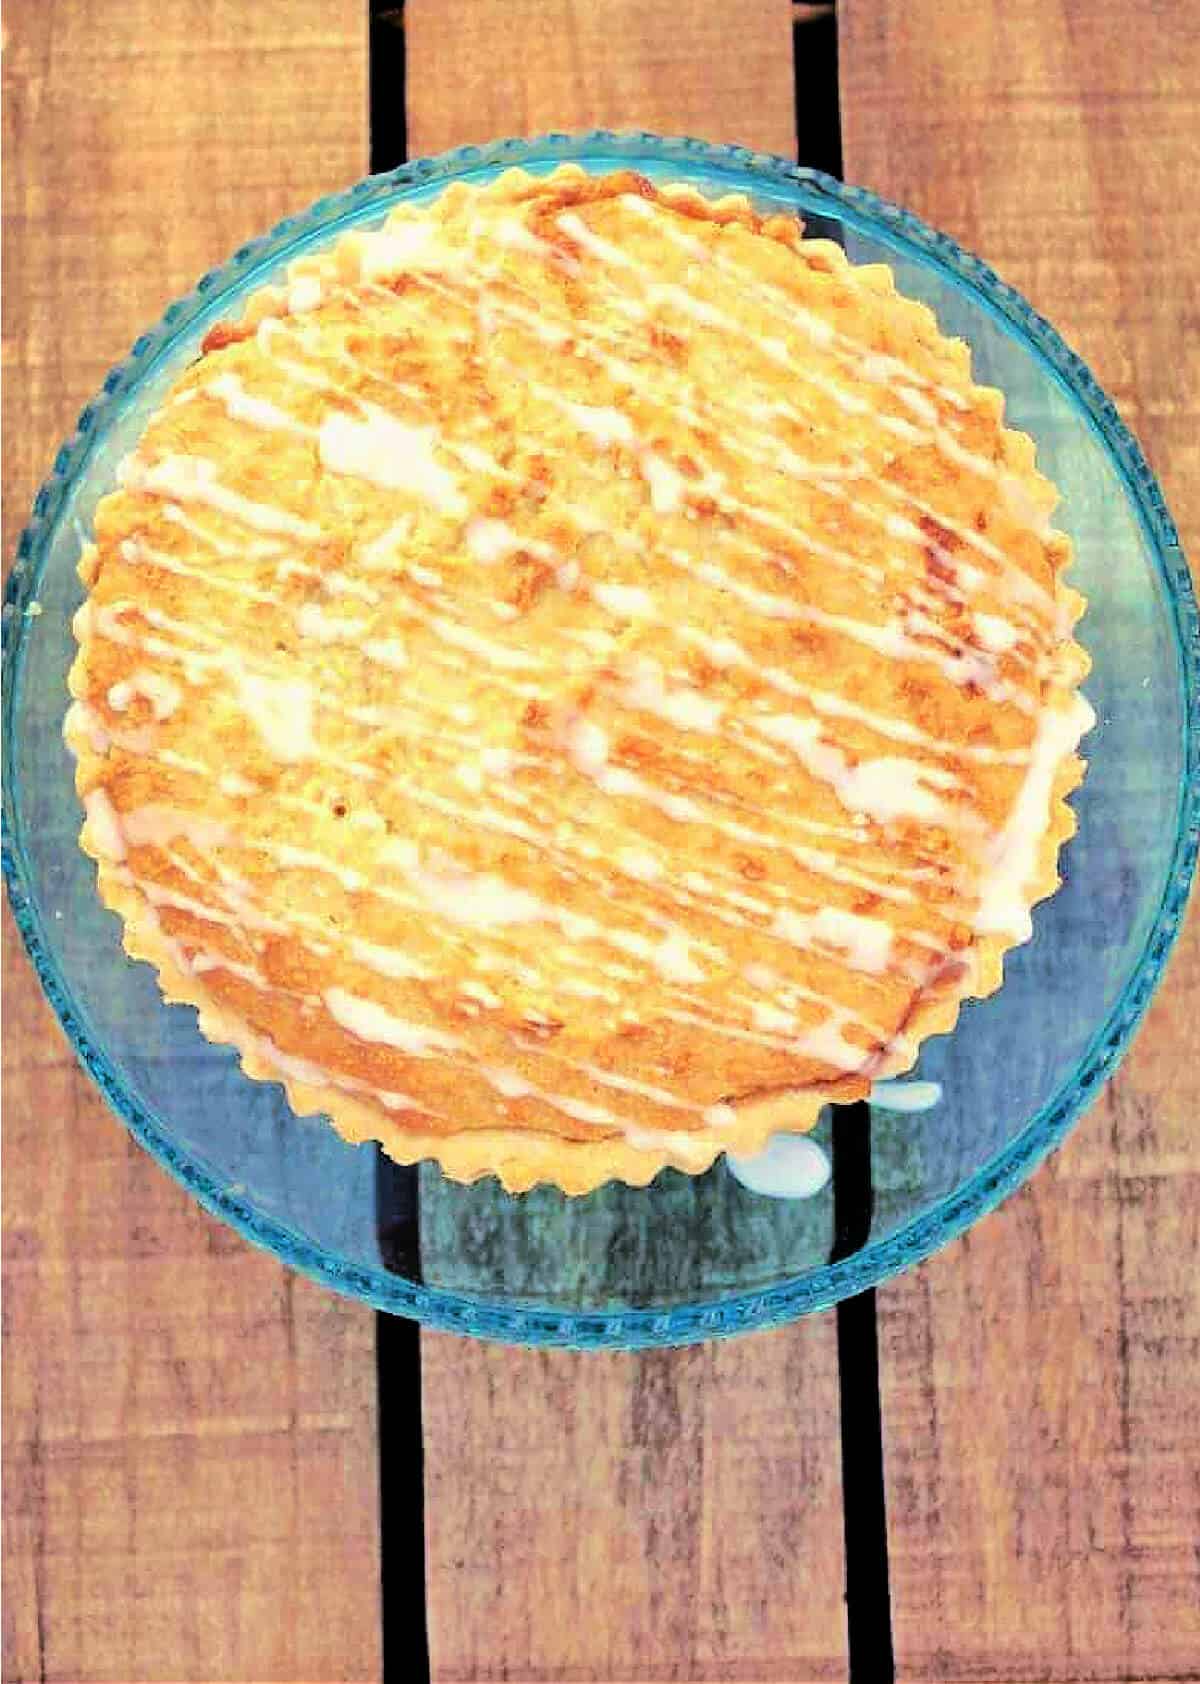 Overhead view of tart with drizzled white icing.